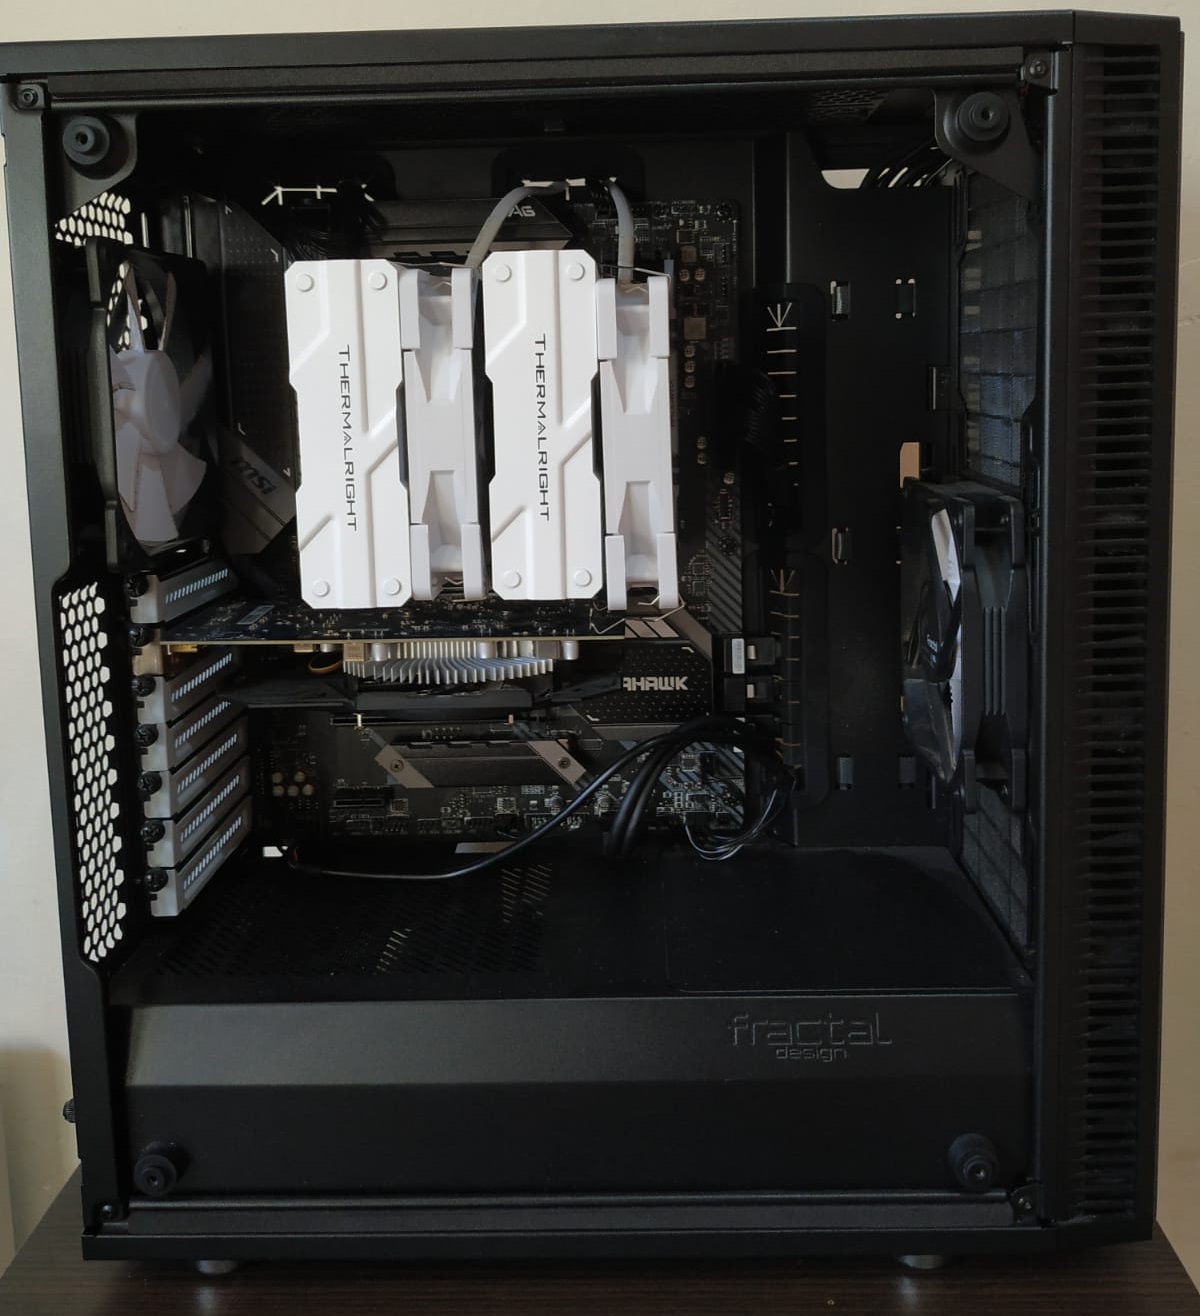 Thermalright Peerless Assassin 120 initial impression and review - Member  Reviews - Linus Tech Tips